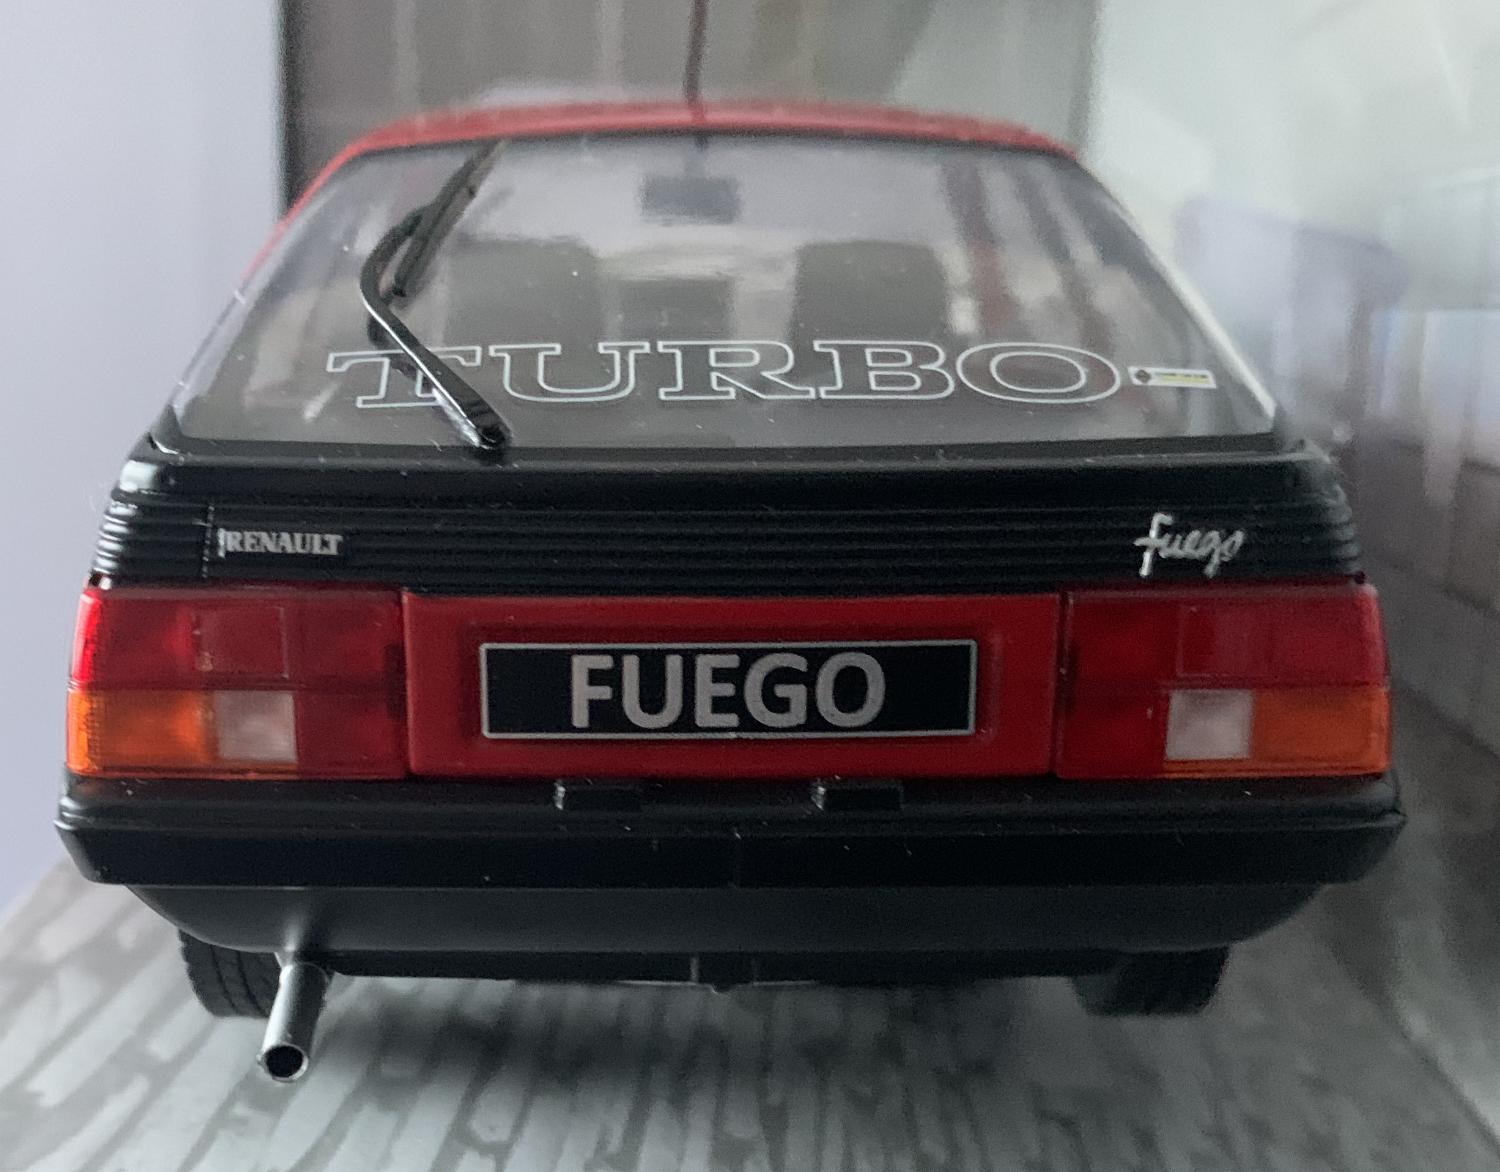 A very good representation of the Renault Fuego Turbo decorated in red with authentic graphics and silver wheels.